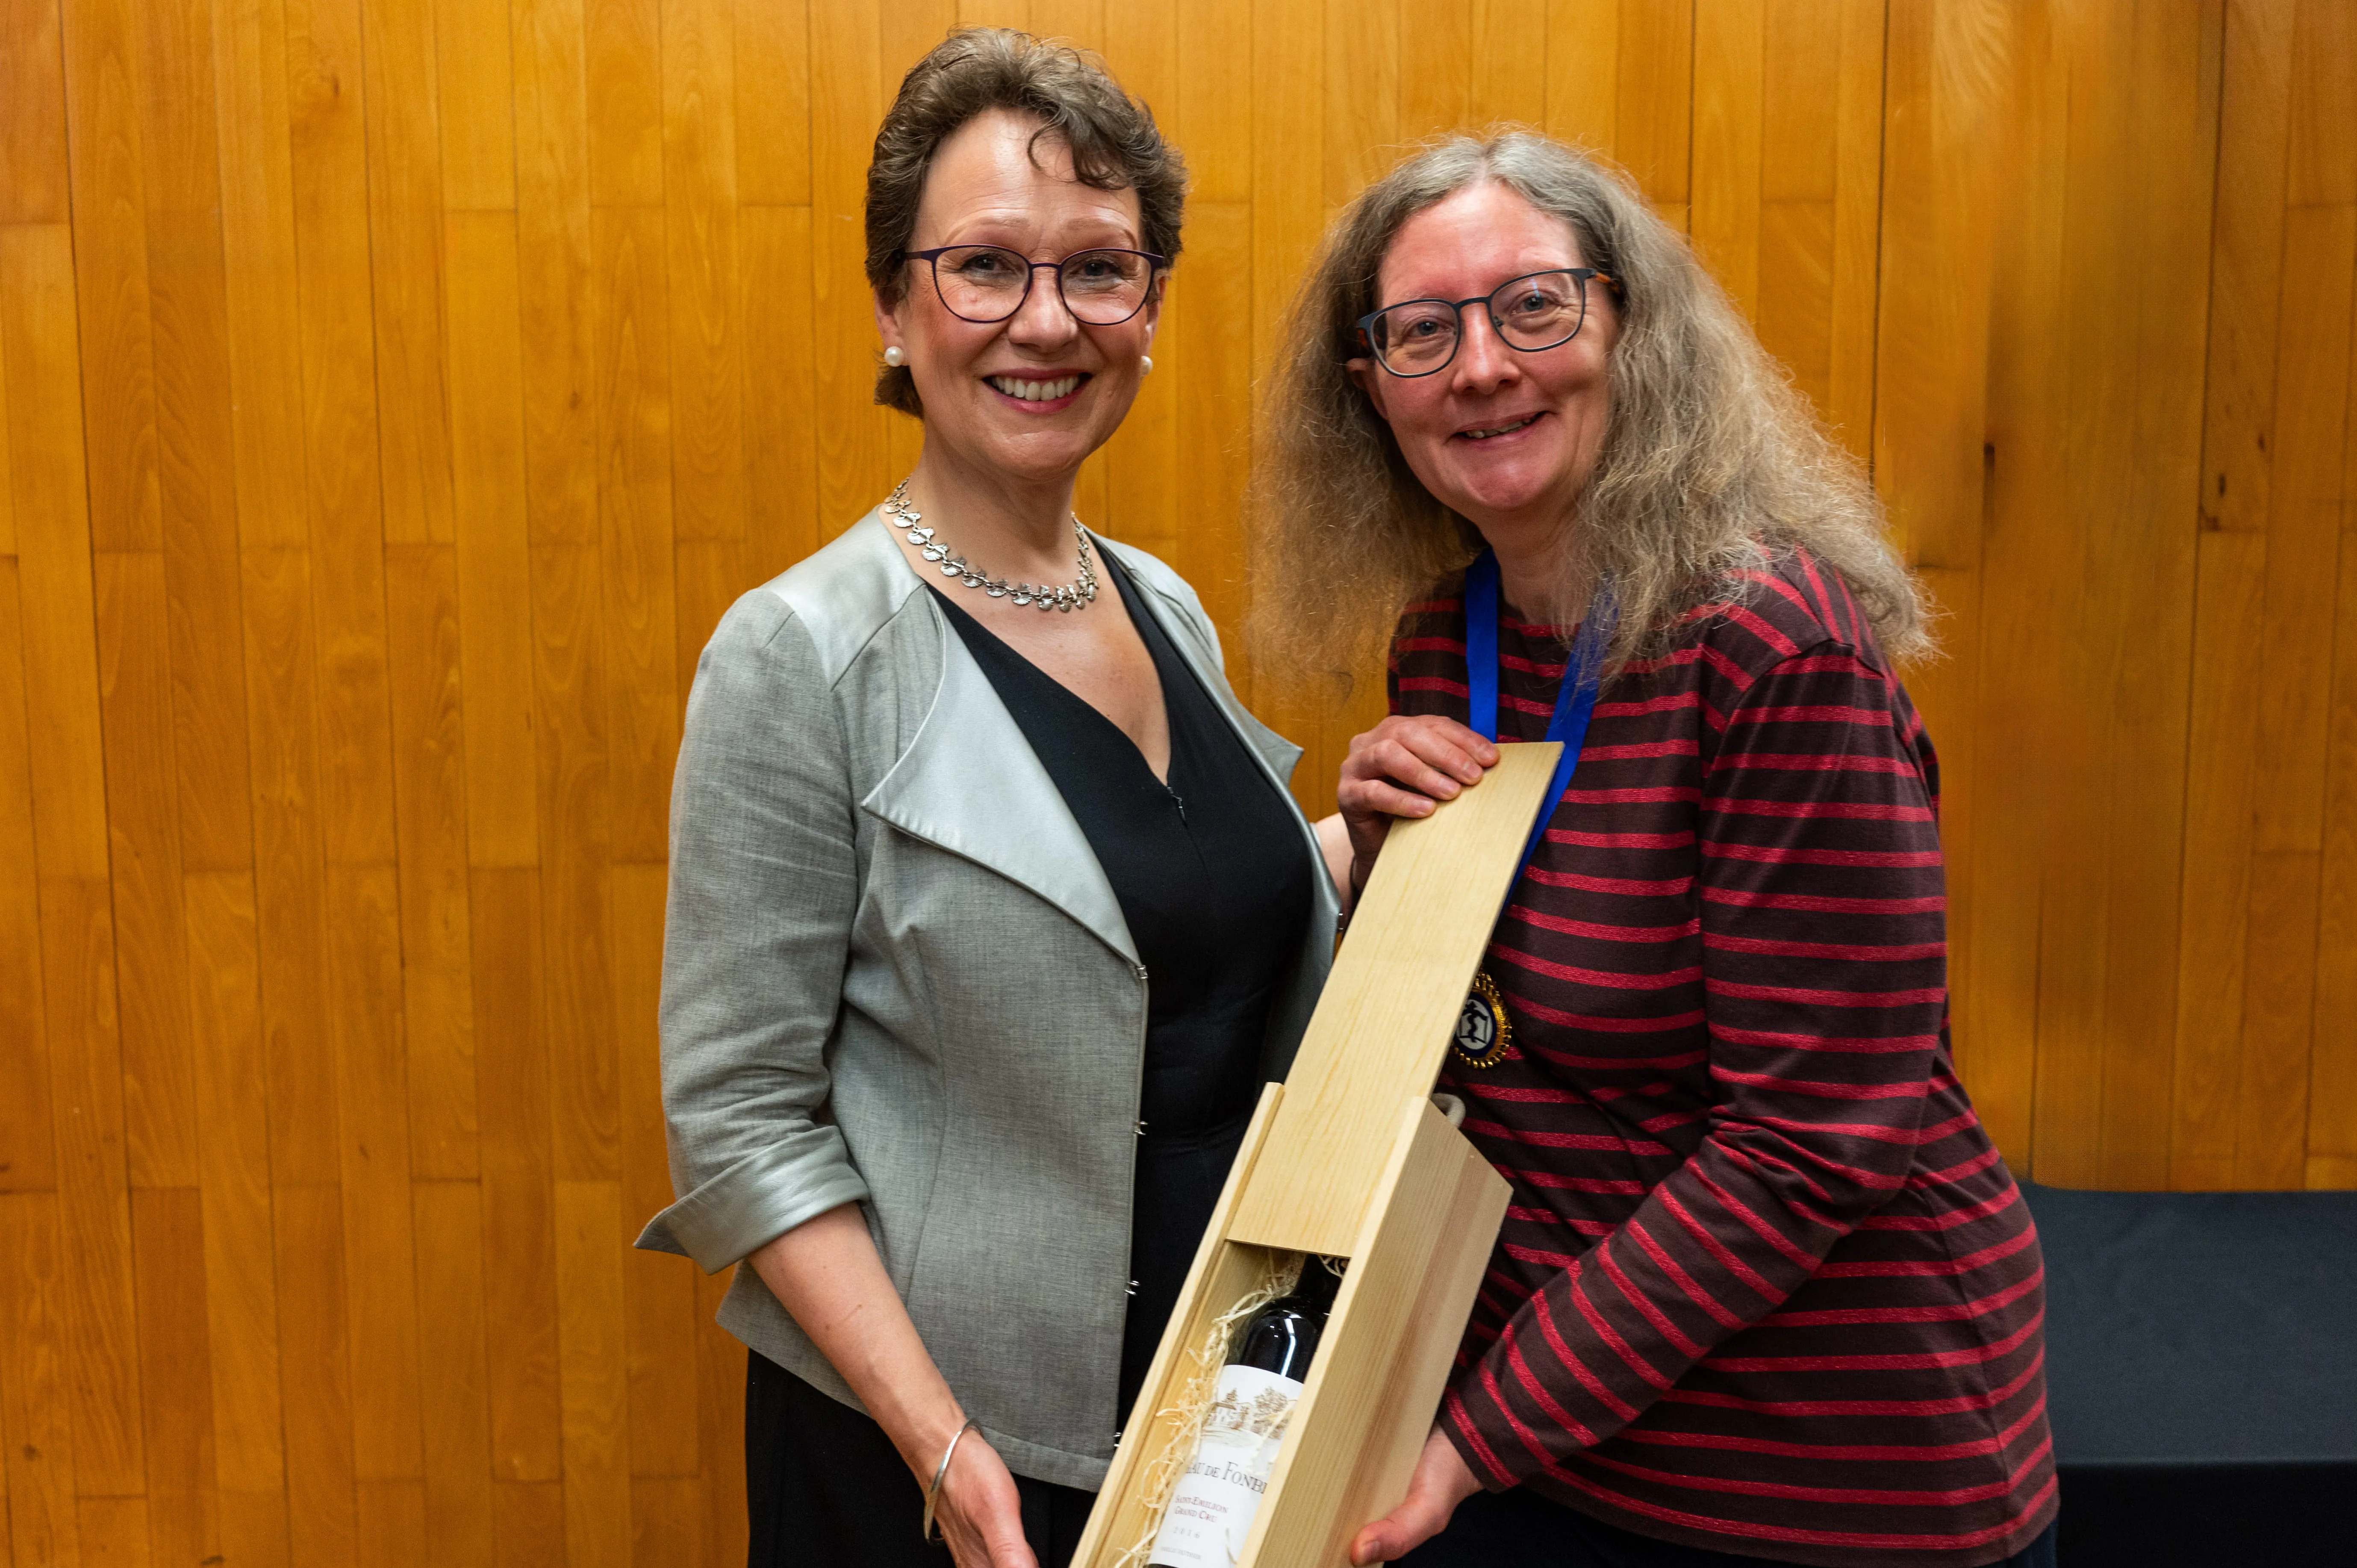 Professor Gallagher with Helen Nield, Head of Library and Knowledge Services at the British Dental Association, and President of the Lindsay Society for the History of Dentistry.